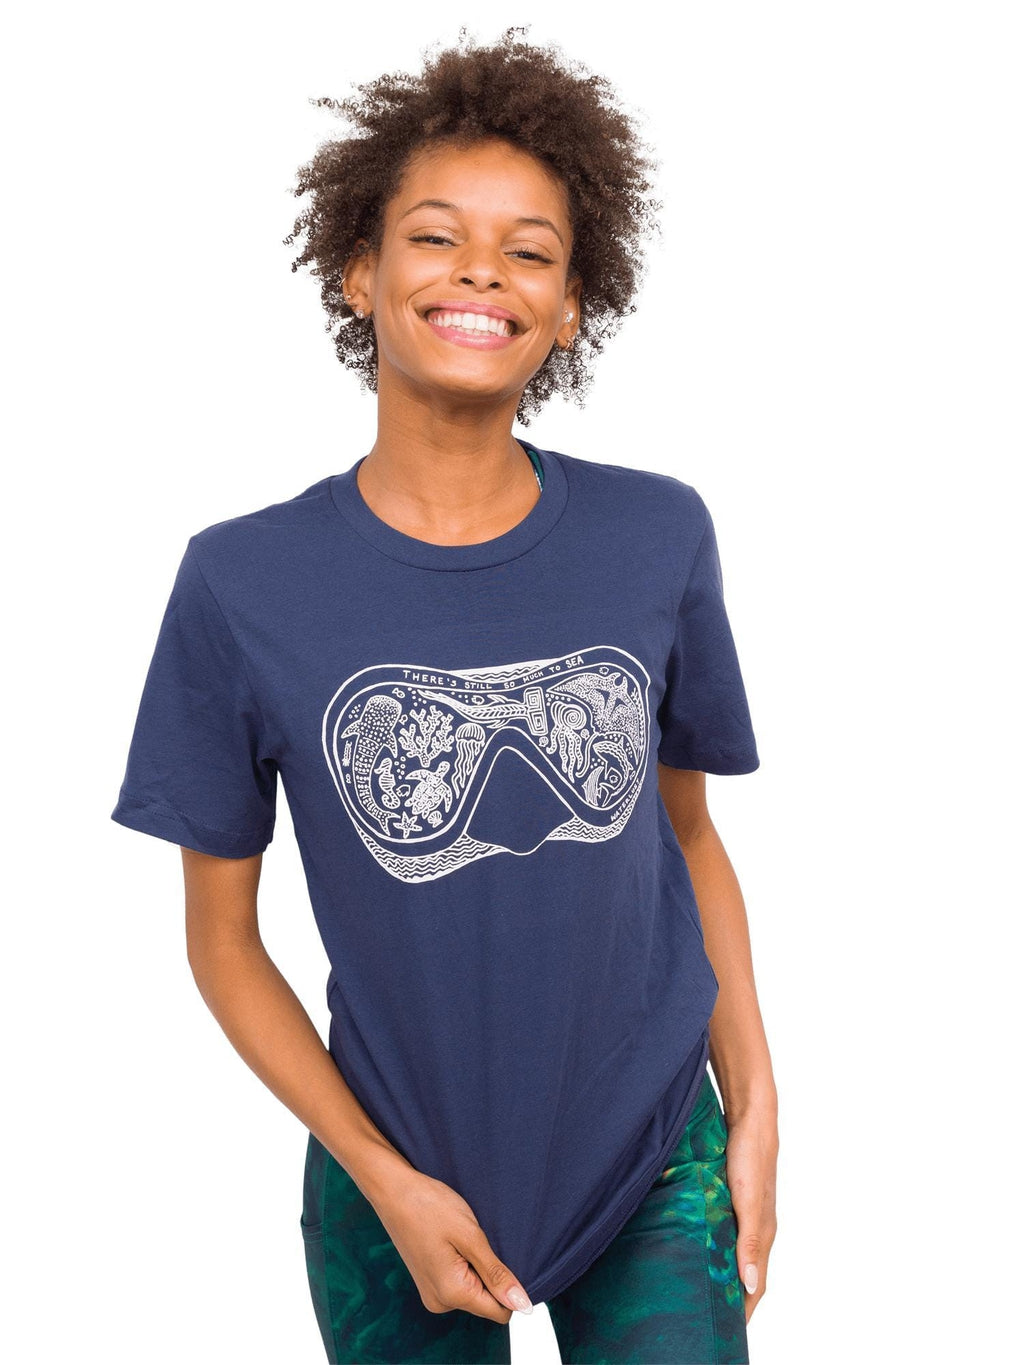 Model: Syriah is a sea turtle conservation biologist. She is 5&#39;7&quot;, 111 lbs and is wearing a size XS tee.